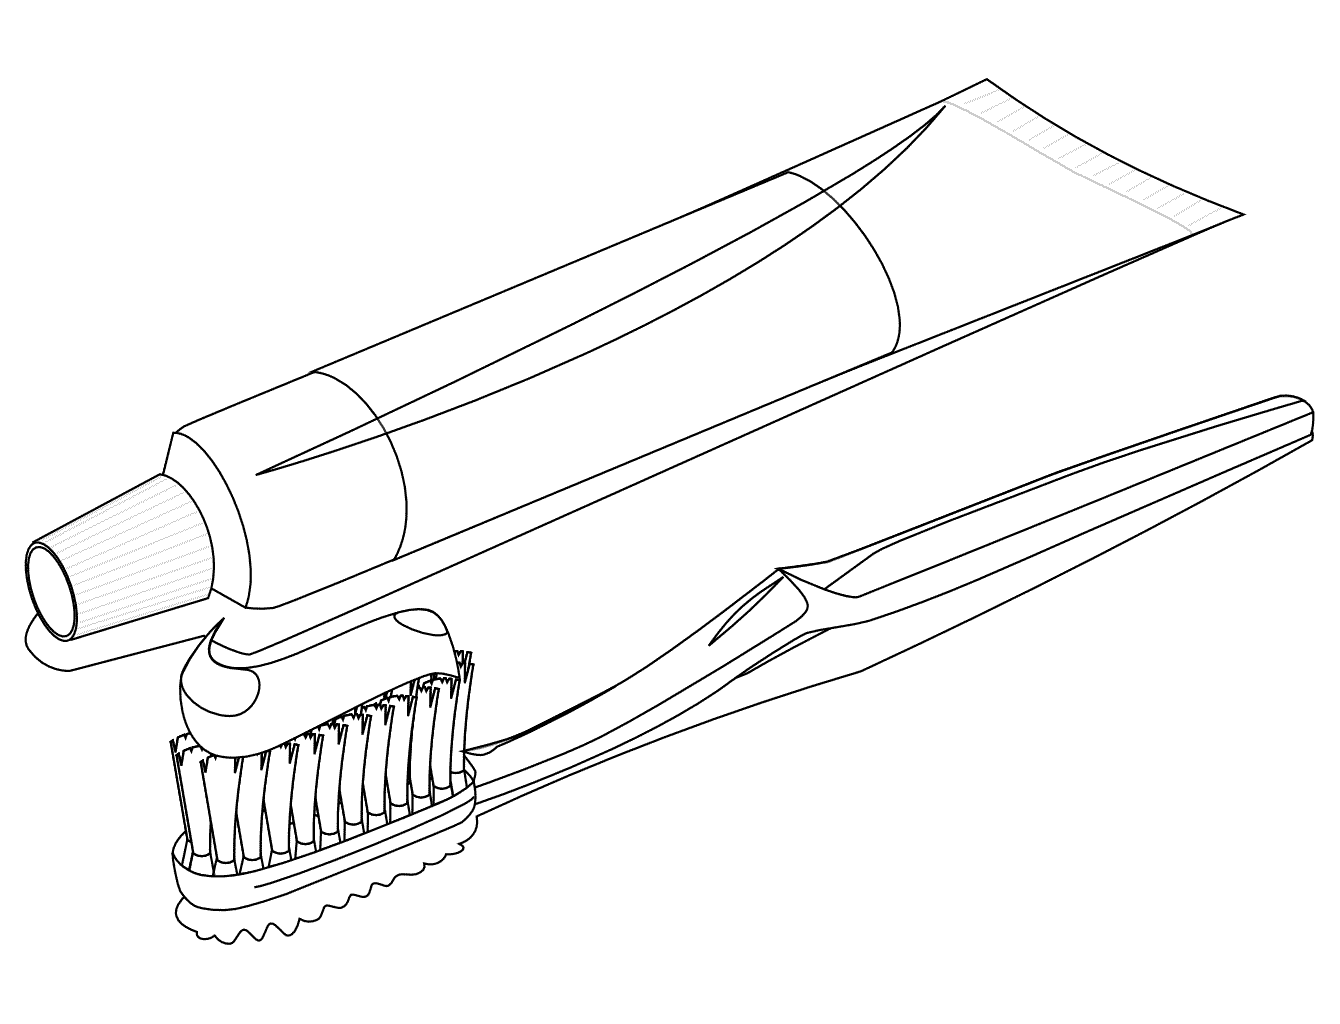 toothbrush coloring page coloring pictures of toothbrush toothpaste coloring pages page toothbrush coloring 